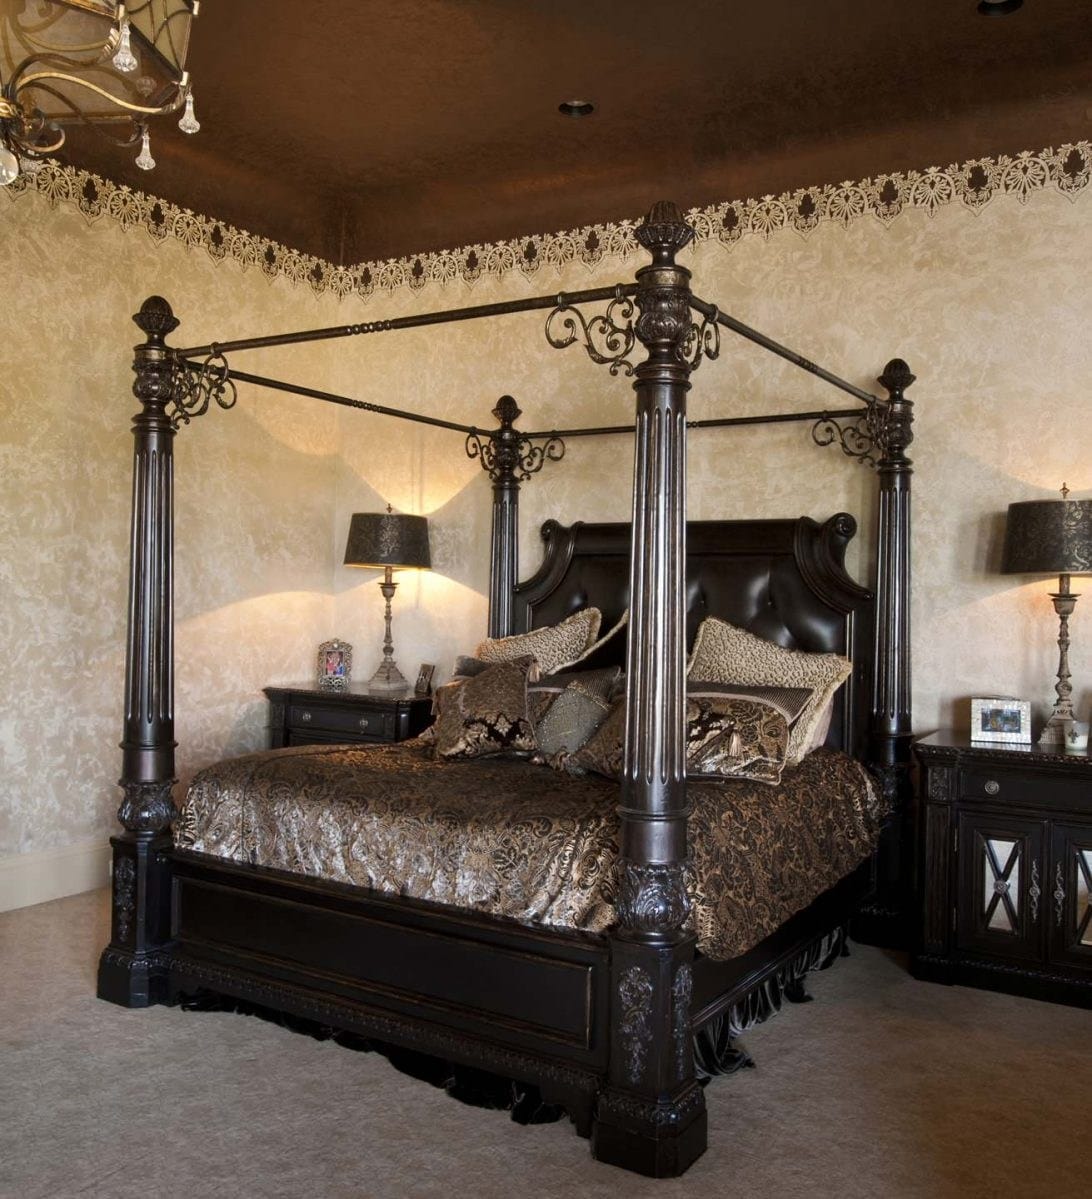 Victorian Gothic Bedroom More Decor Ideas Black Bedroom Gothic Tips Modern Home Goth Intended For 13 Genius Initiatives Of How To Improve Modern Gothic Bedroom ?strip=all&lossy=1&resize=1092%2C1199